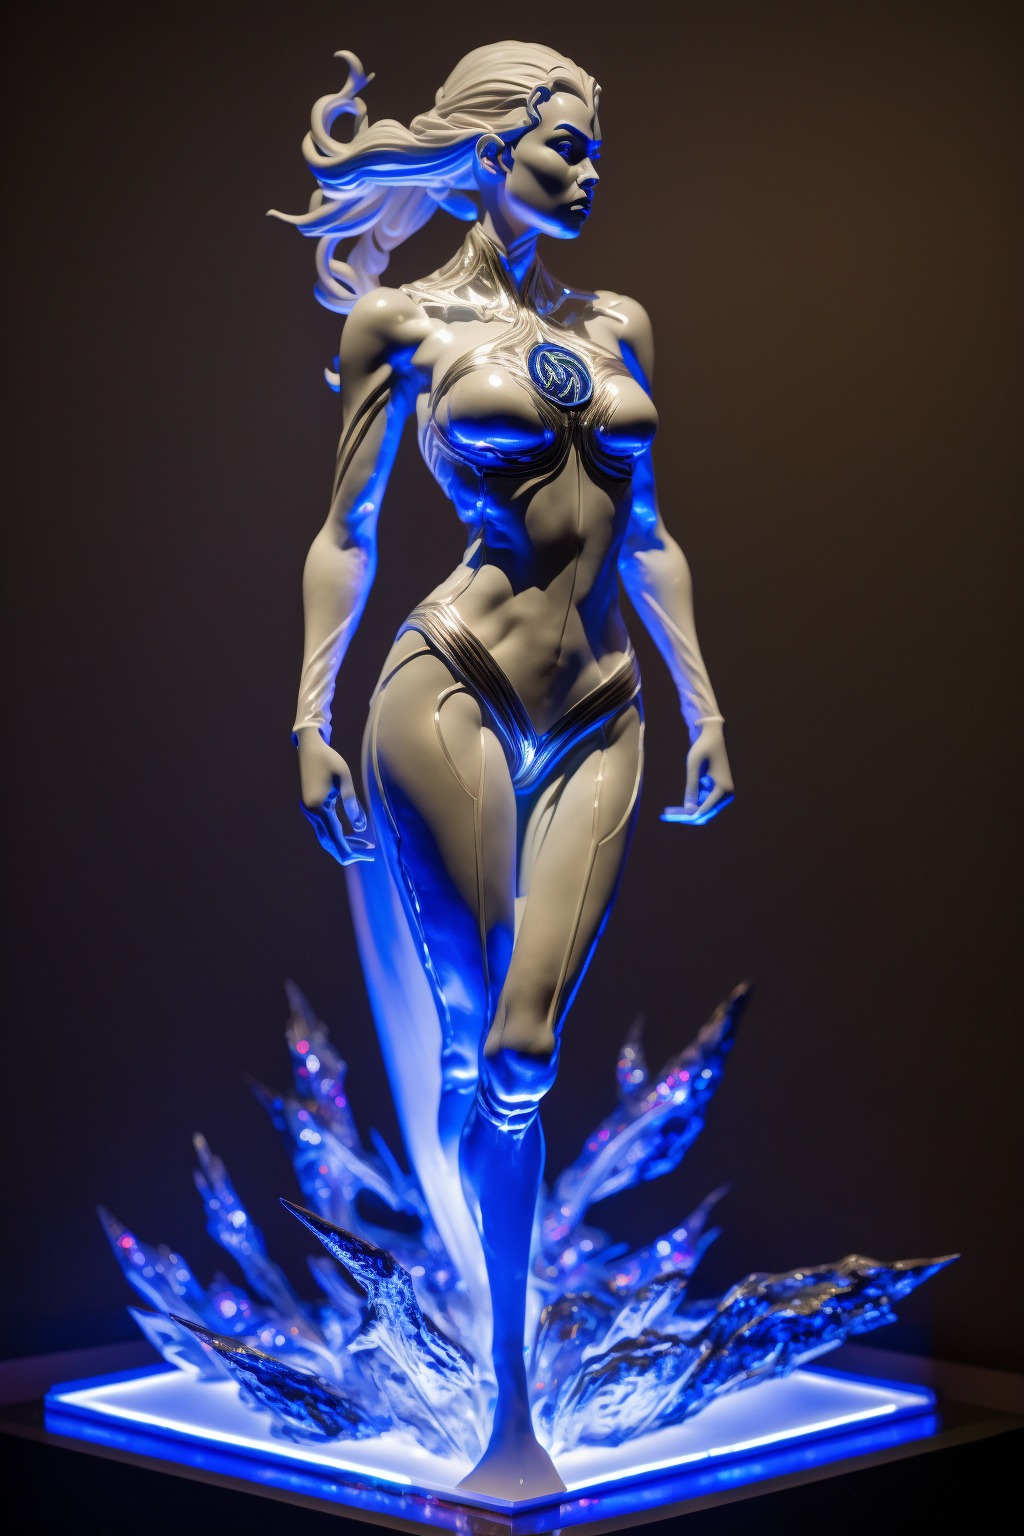 DC Superheroes & Villains as statues made of various material prompts (all with chrome inlets) - movingworl.com